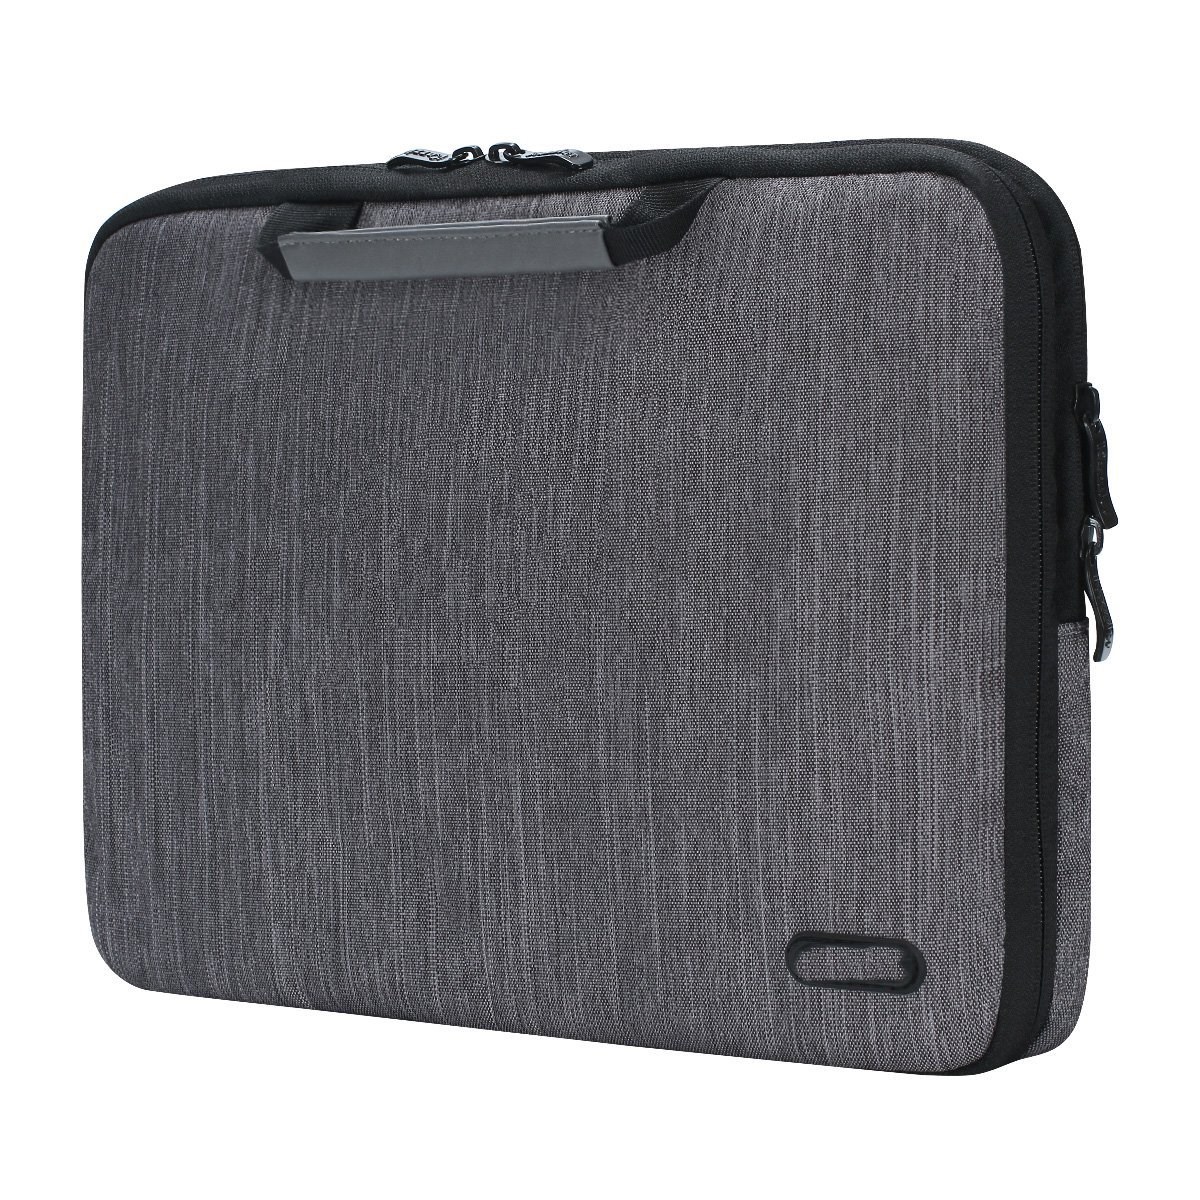 13-13.3 Inch Handle Electronic accessories Strap Laptop Sleeve Case Bag Protective Bag ...